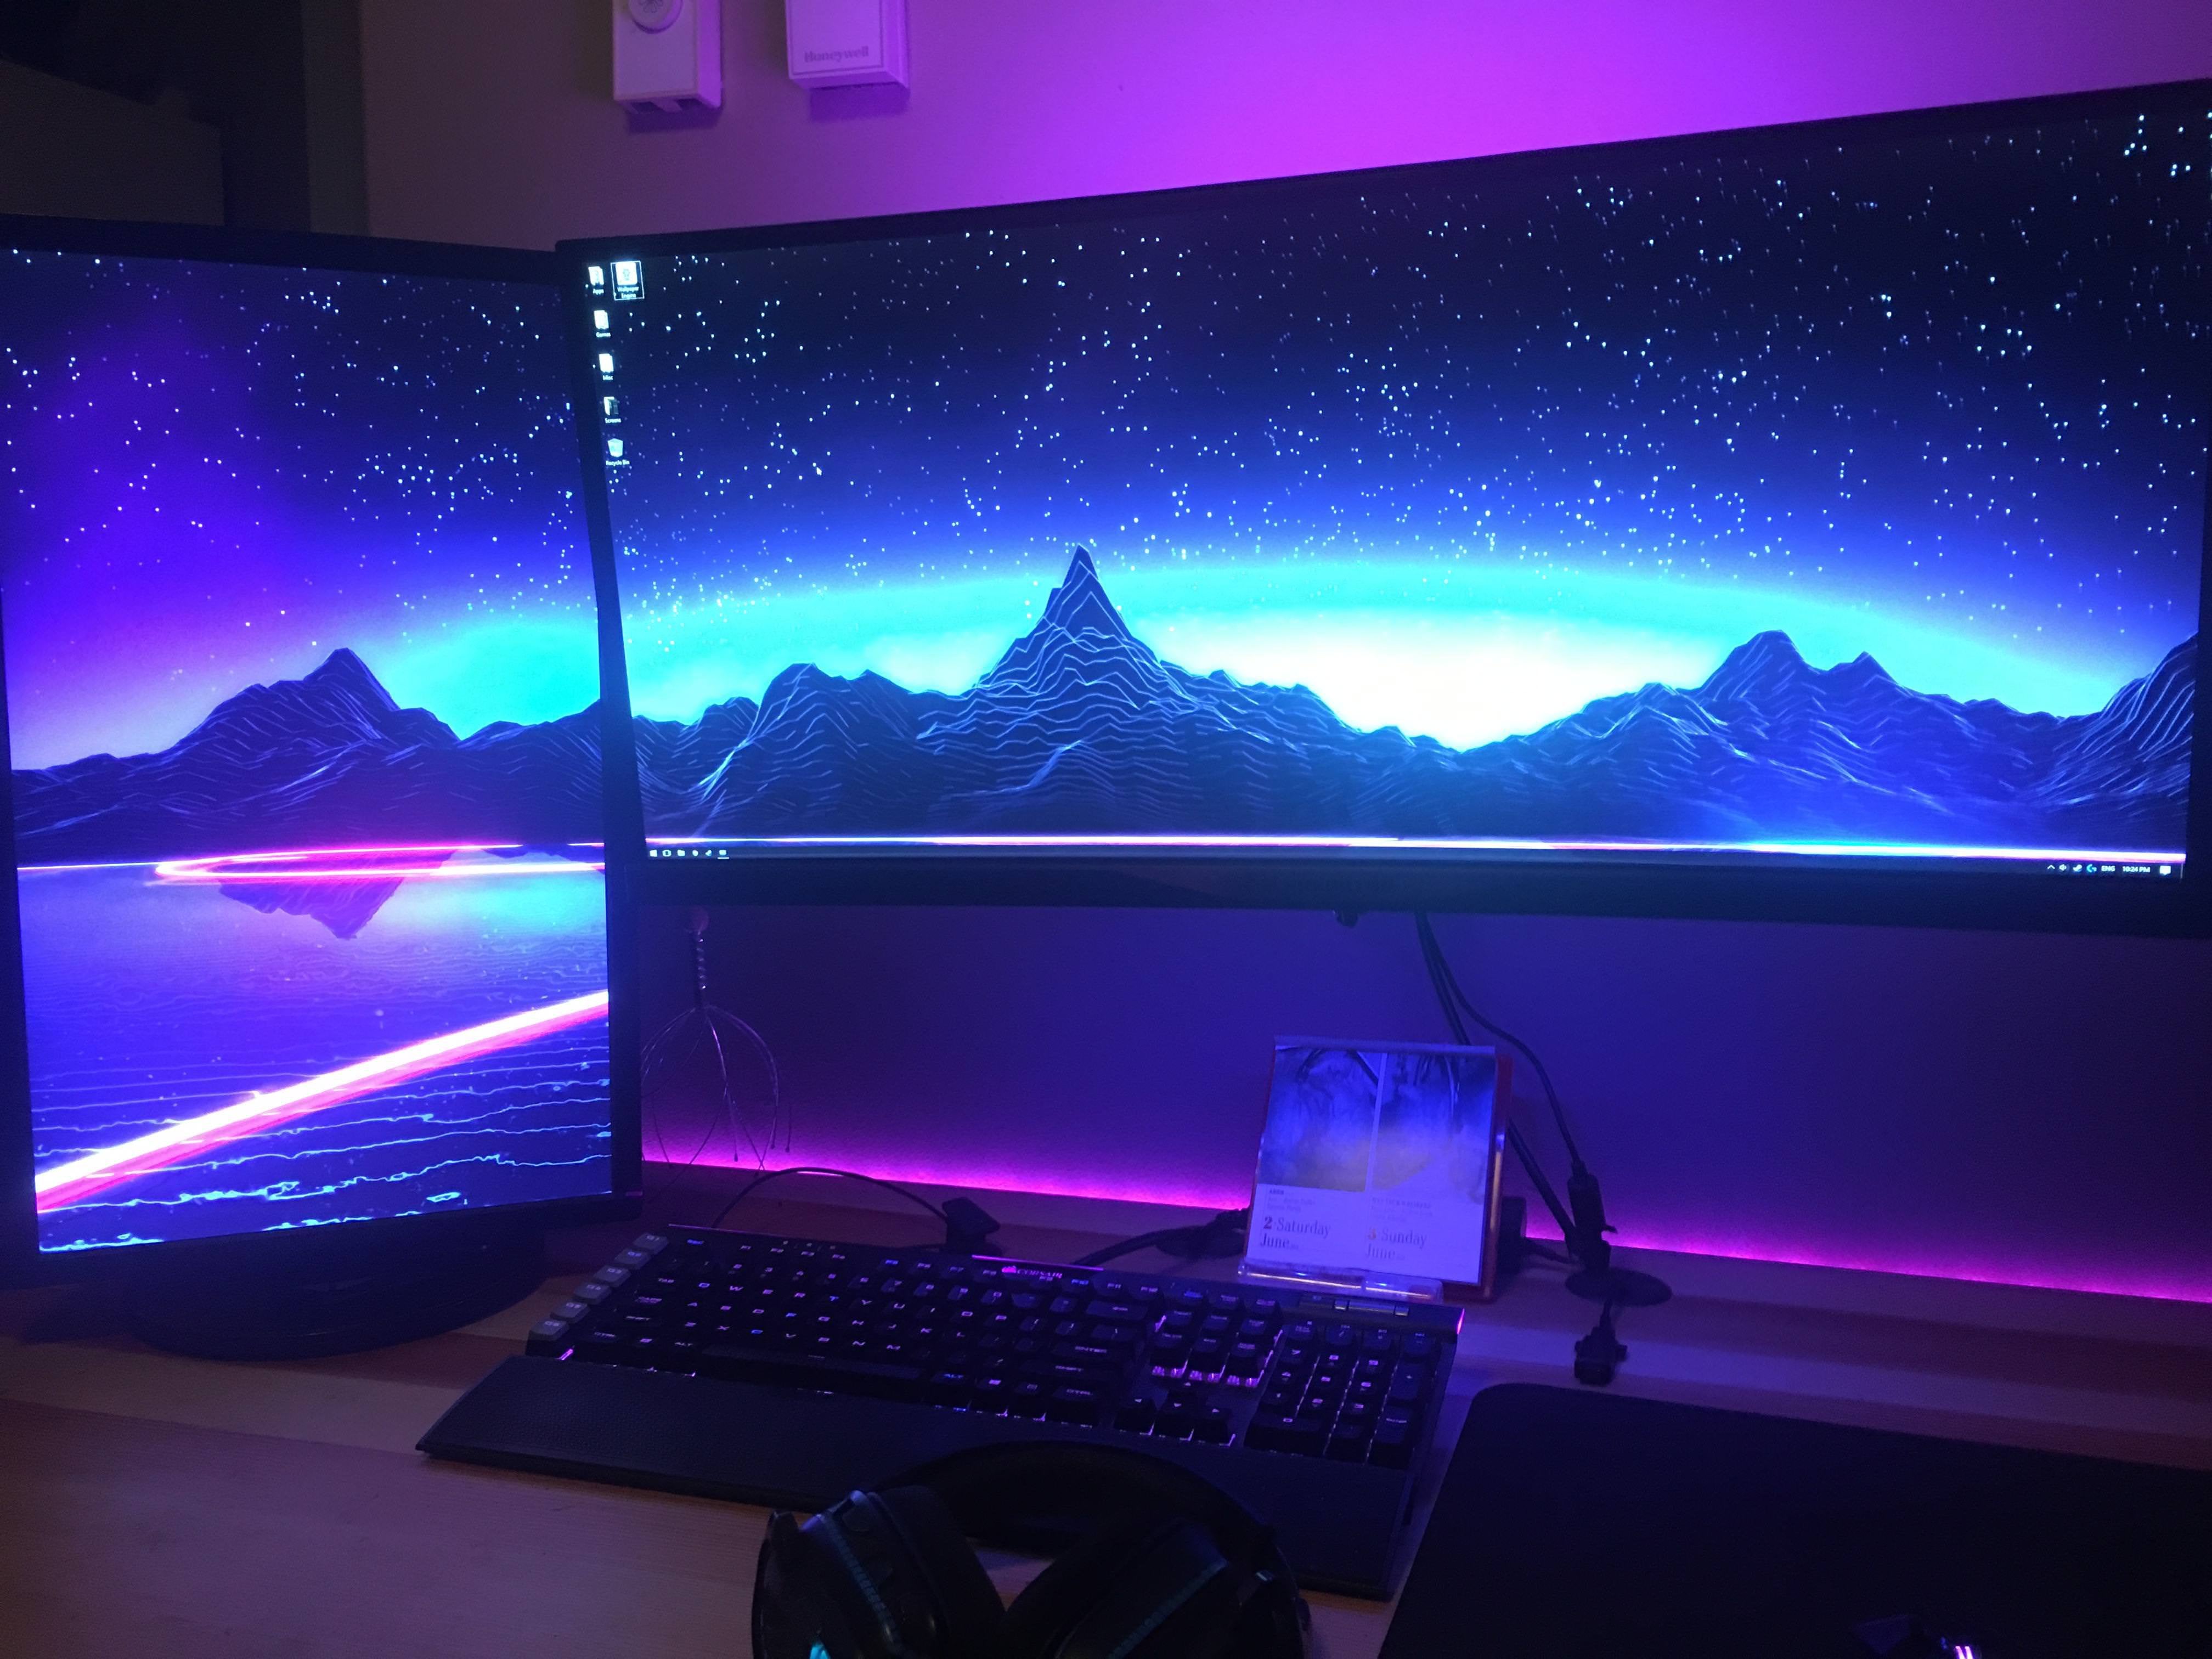 Decided to try out wallpaper engine with my two